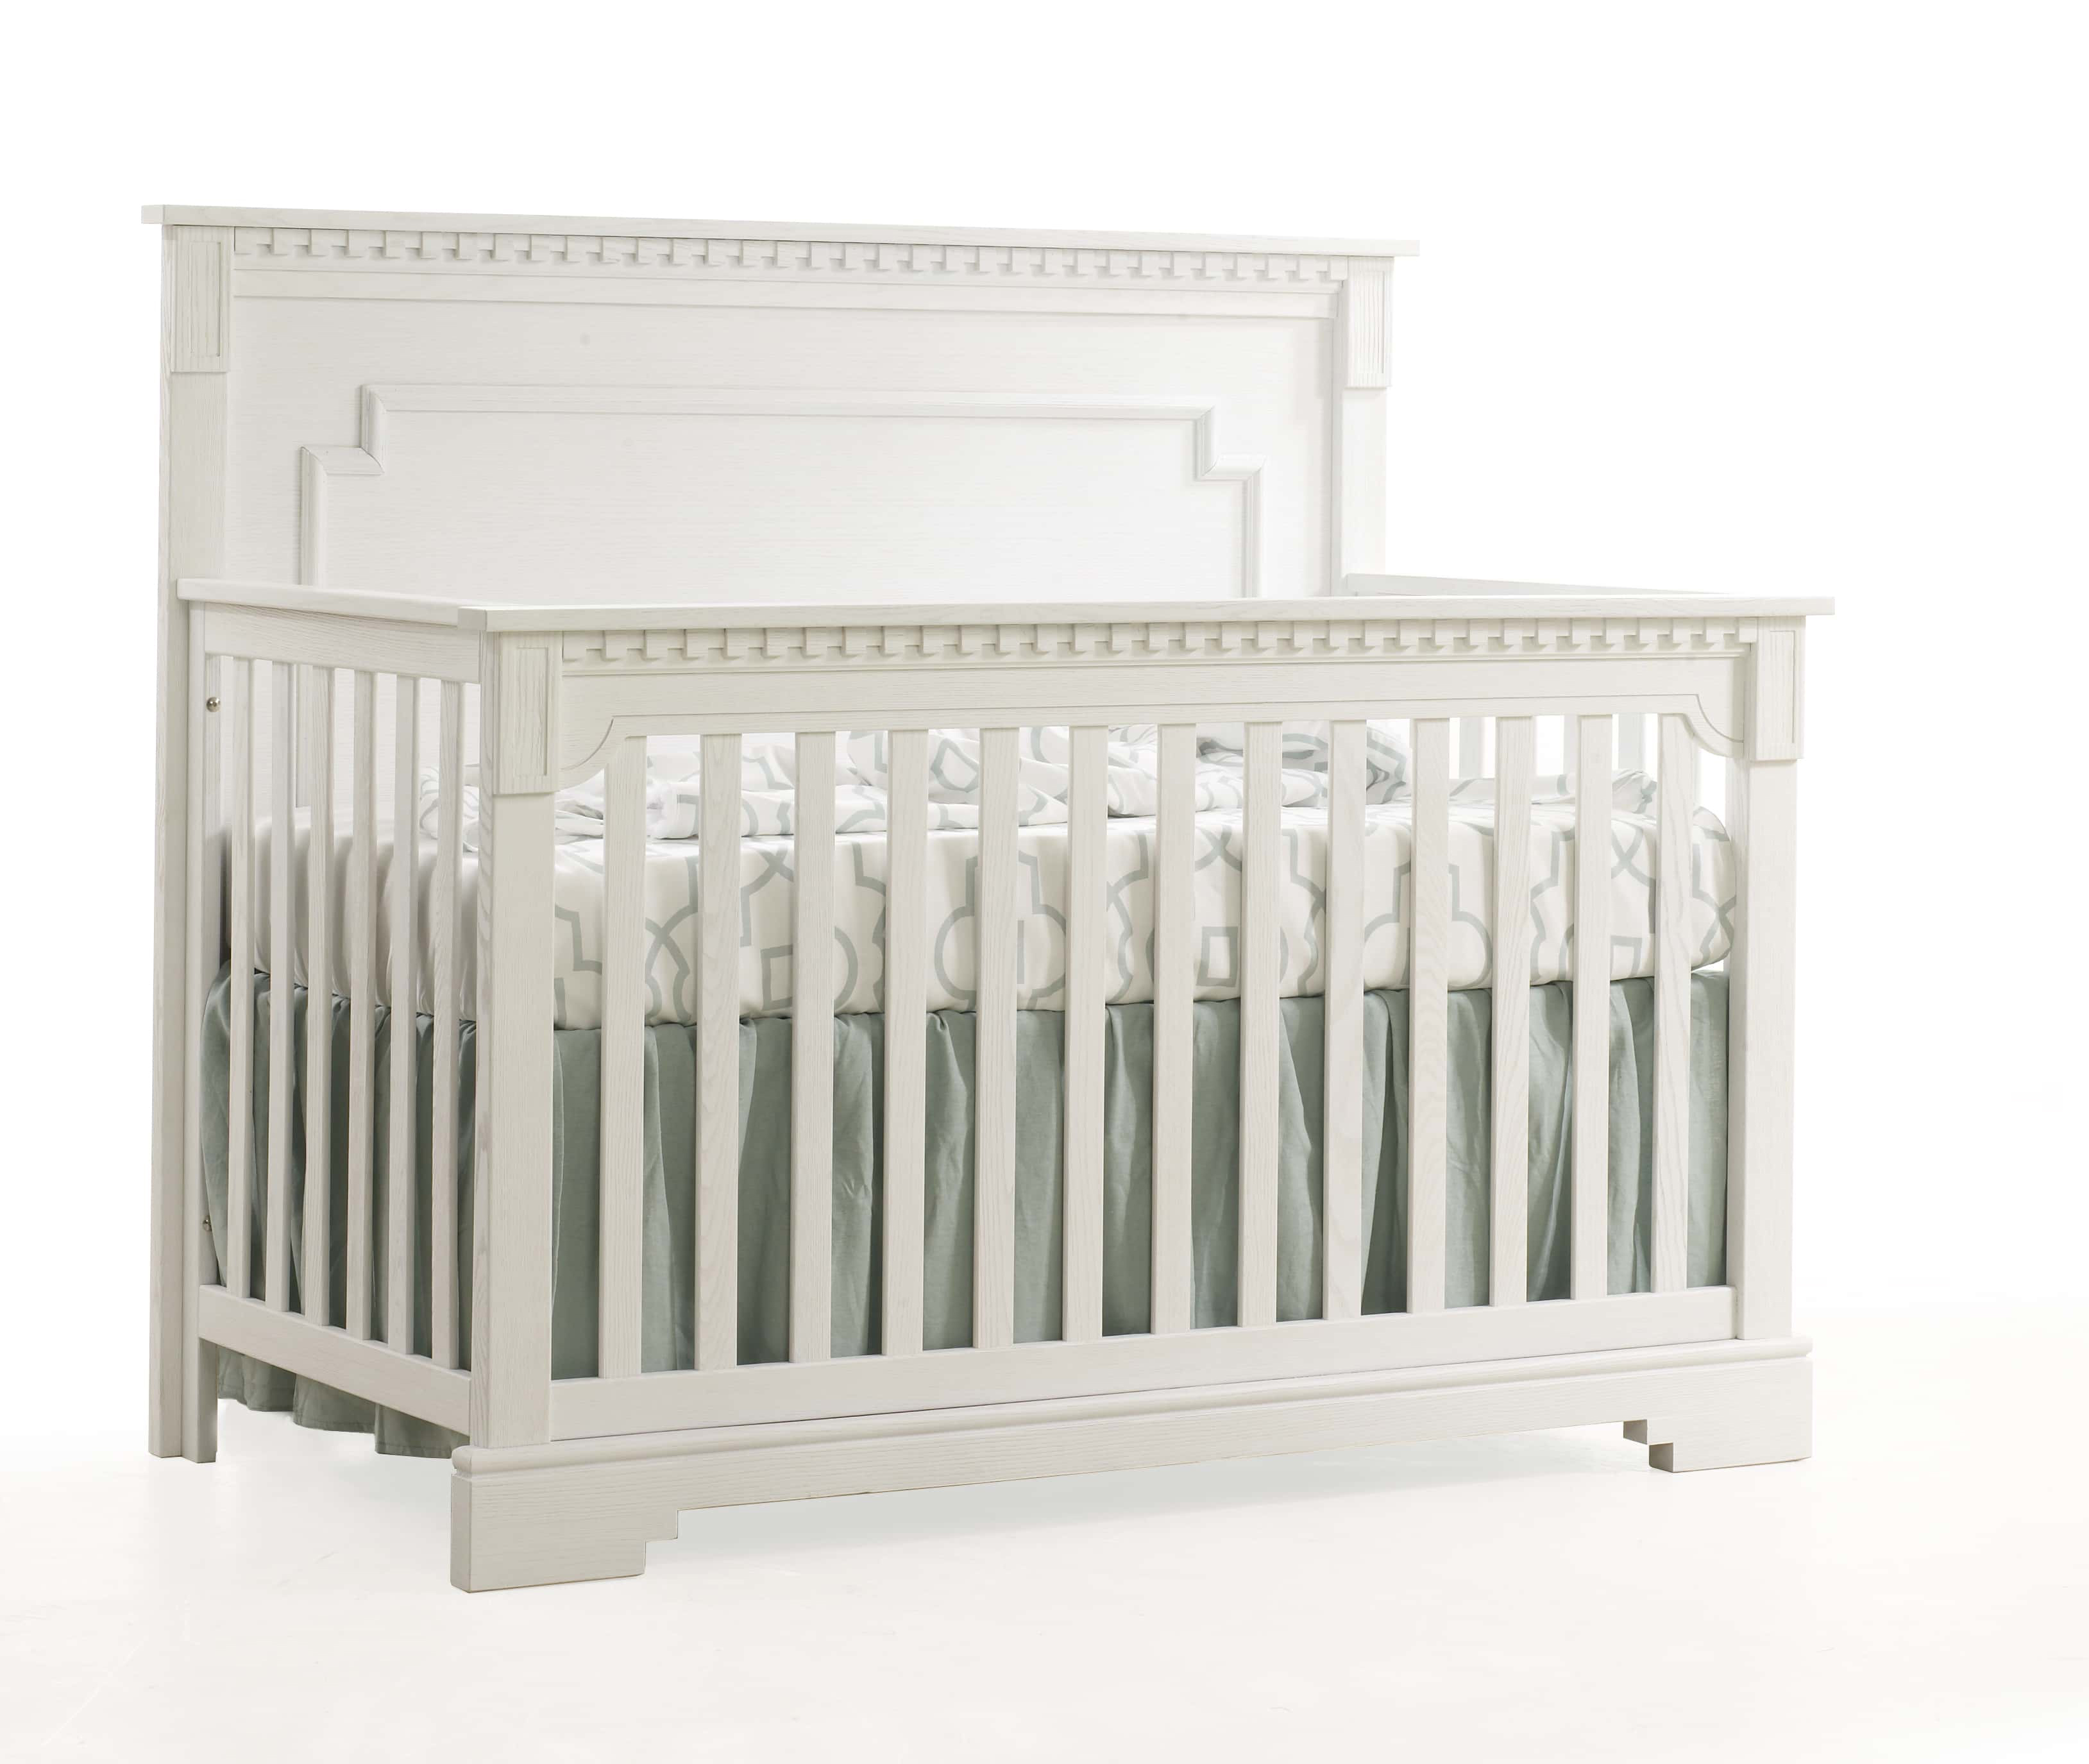 Ithaca 5 in 1 Crib